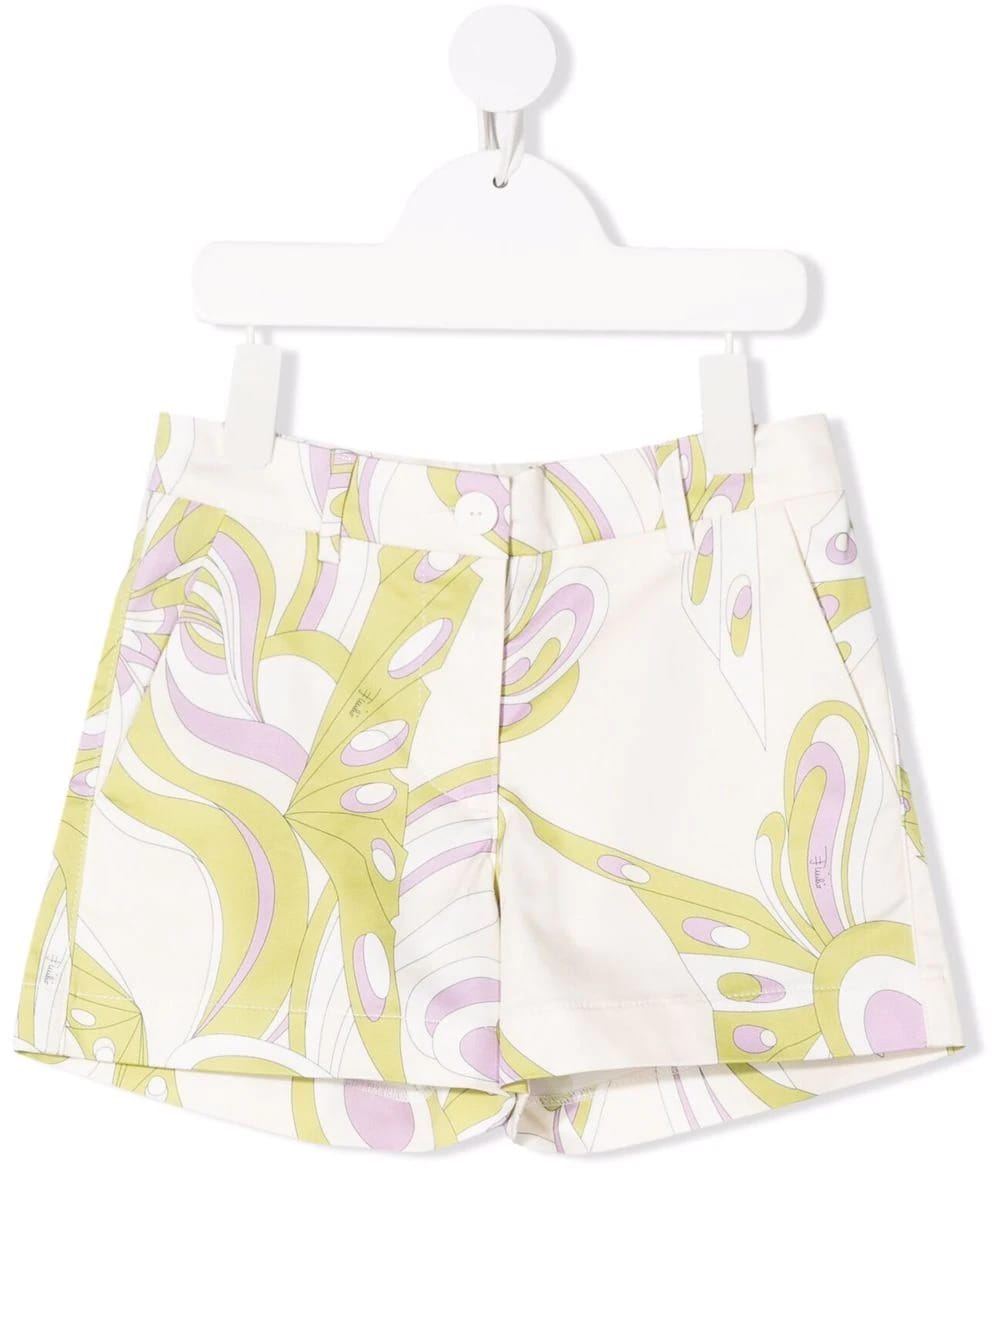 Emilio Pucci Kids Light Green Shorts With Lilac And White All-over Print